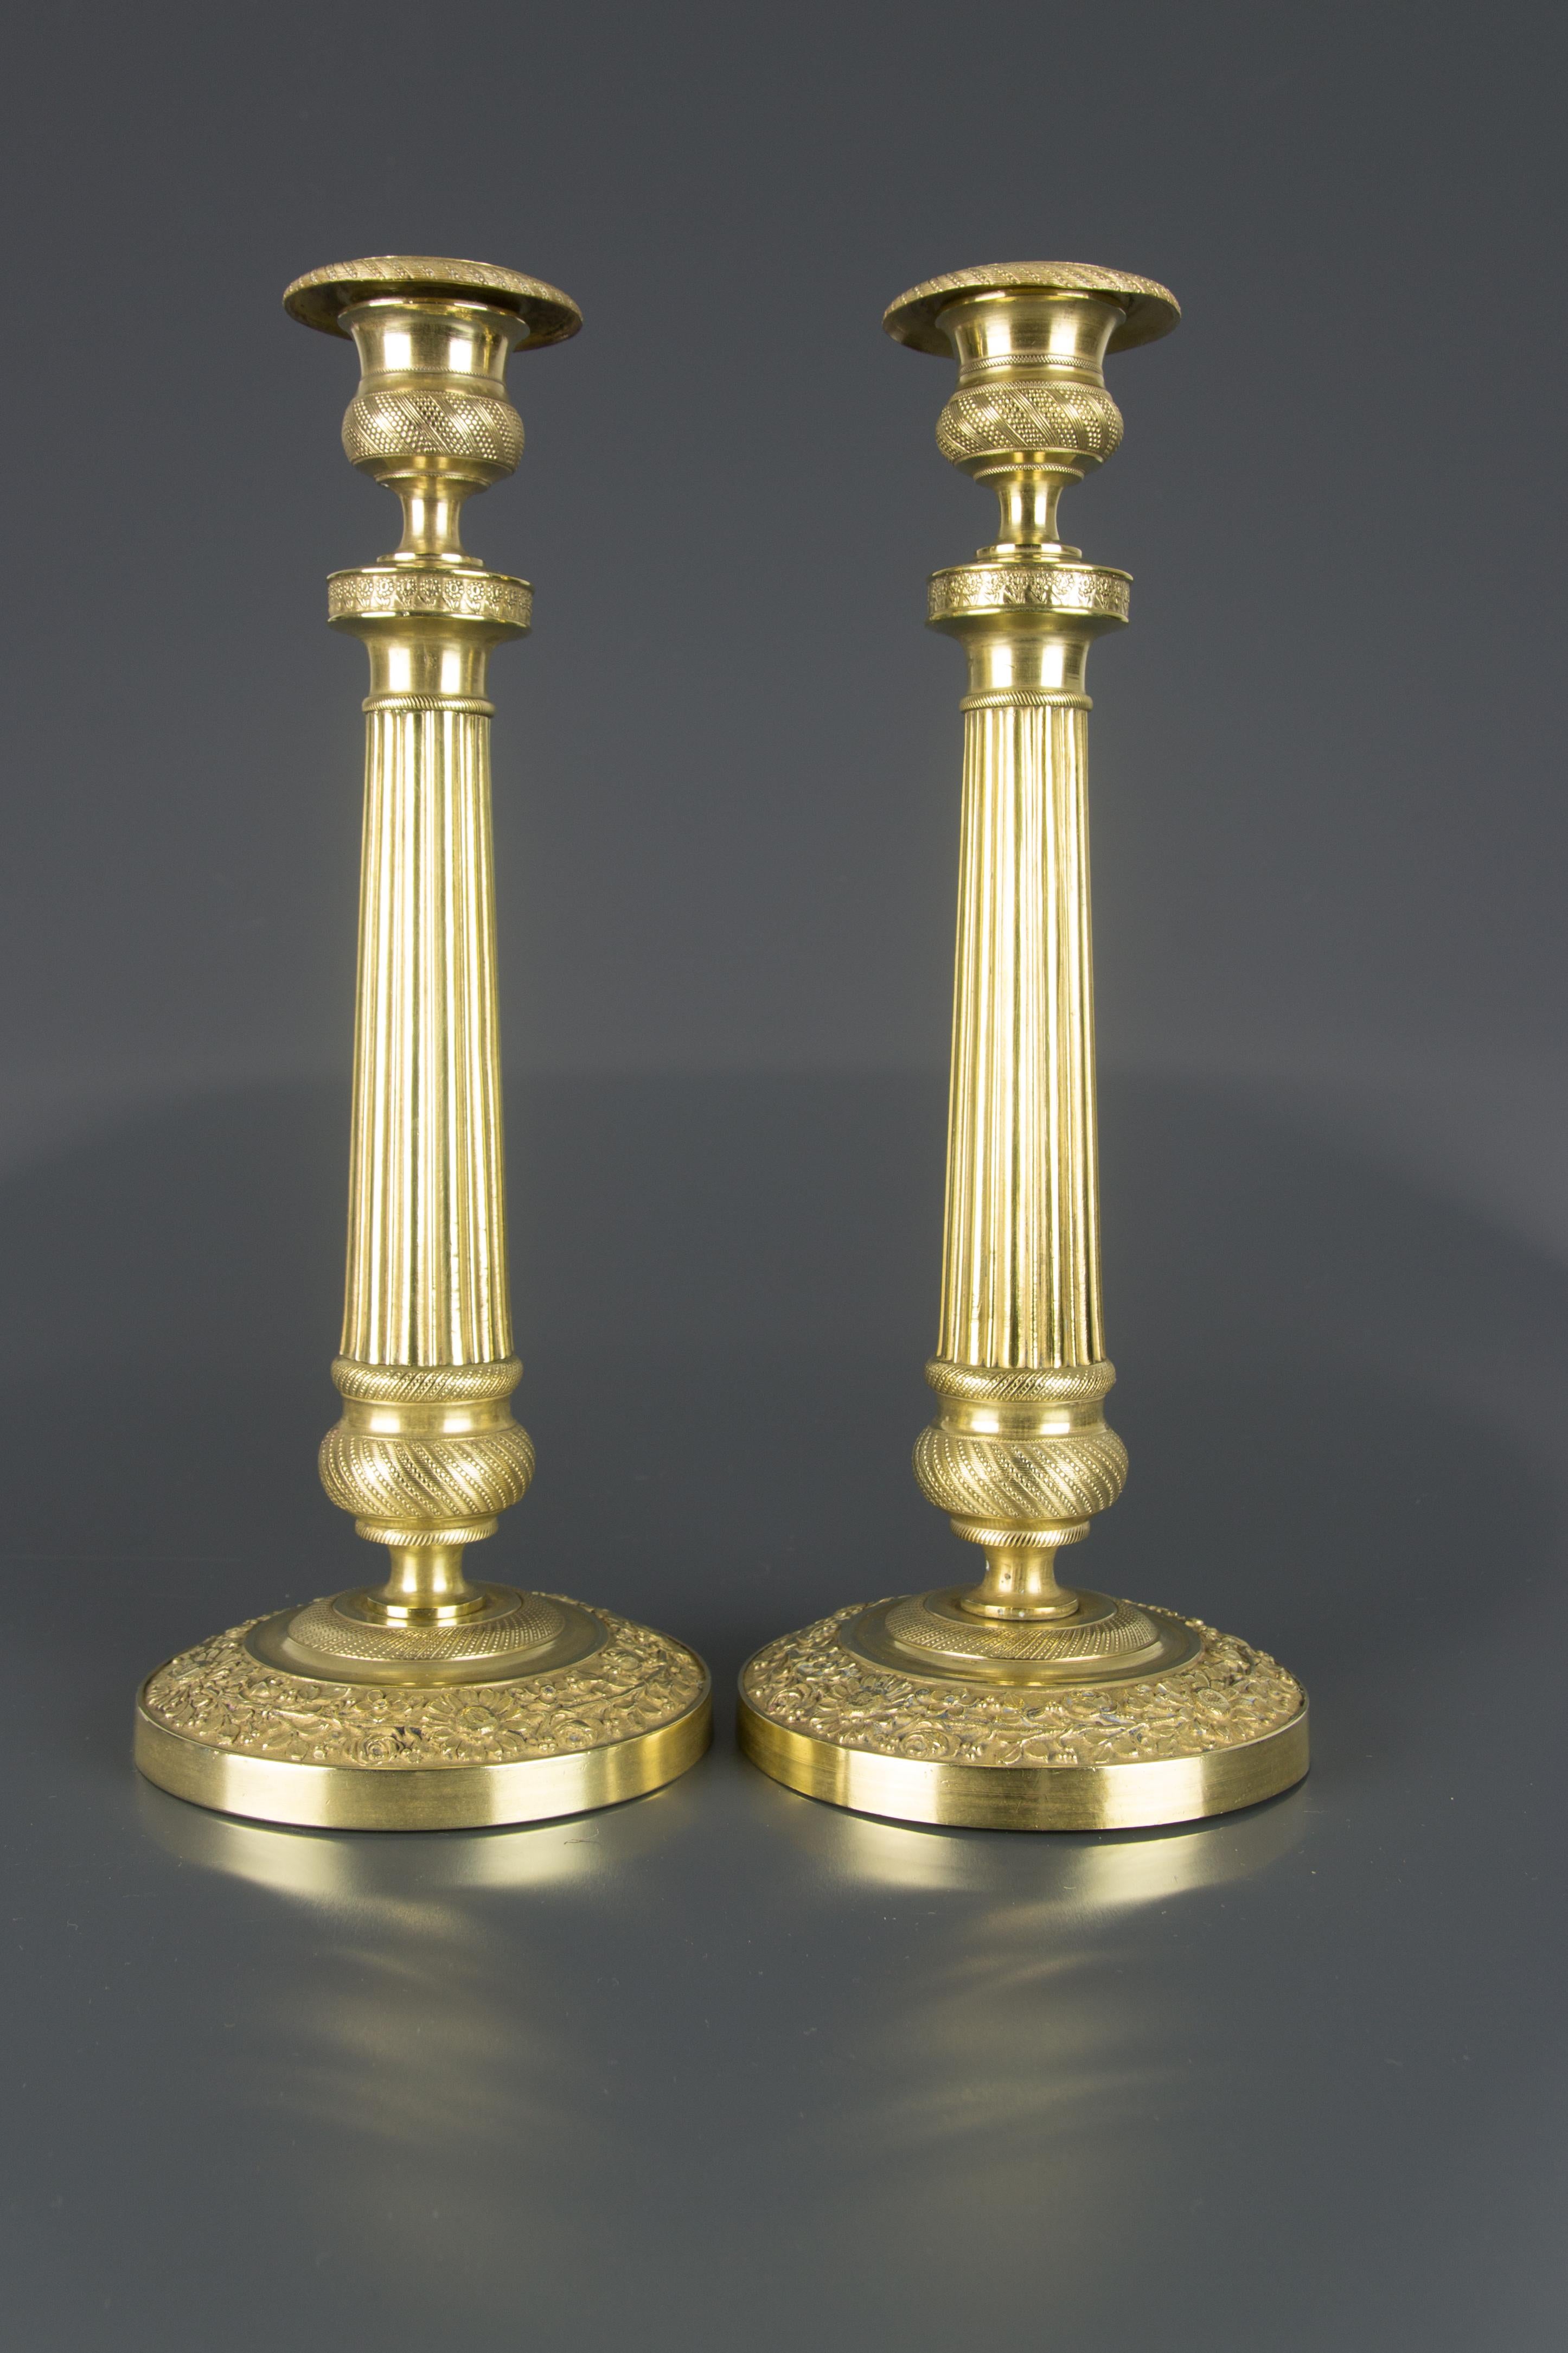 Restauration Pair of French Brass Candlesticks with Floral Motifs, 1920s